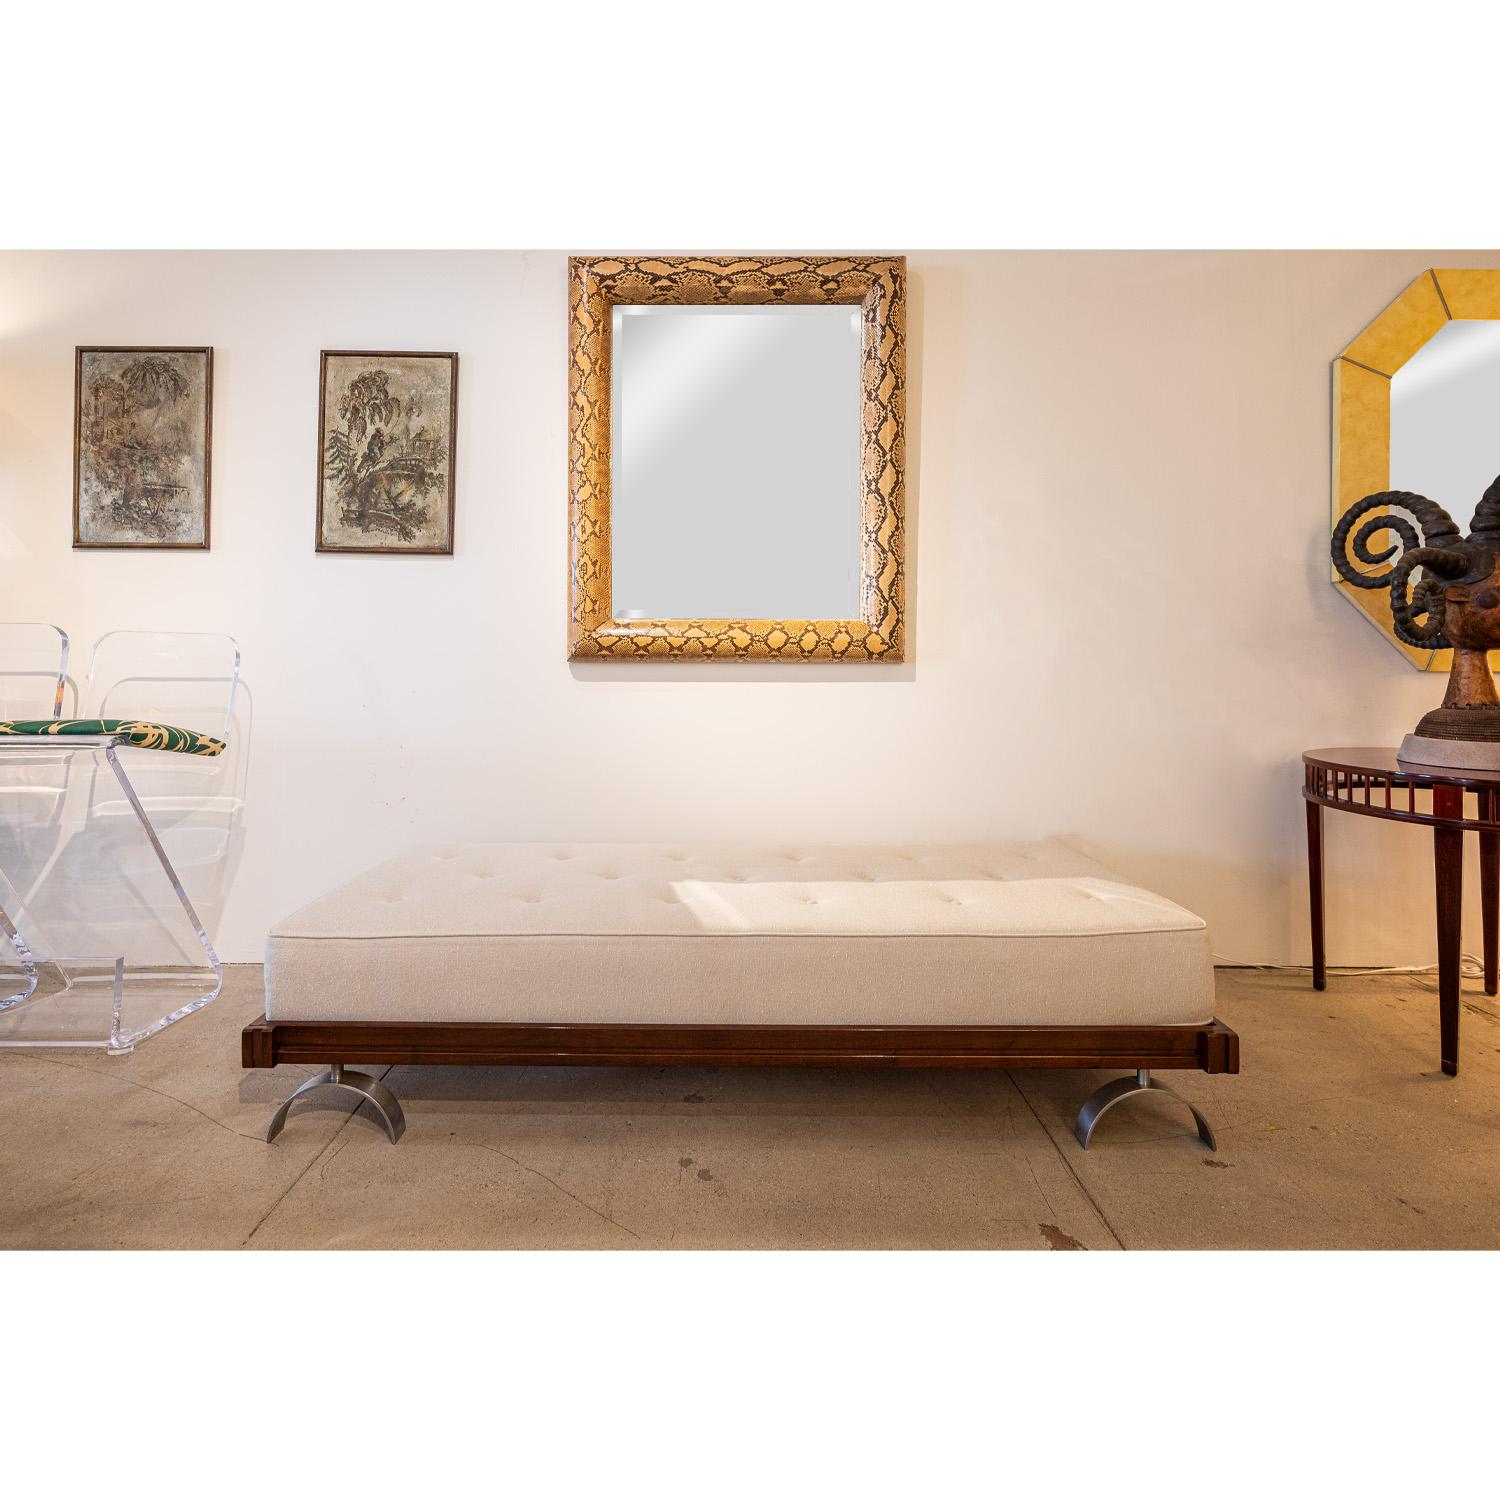 Mid-20th Century Martin Borenstein Elegant Daybed/Bench with Sculptural Legs, 1950s For Sale